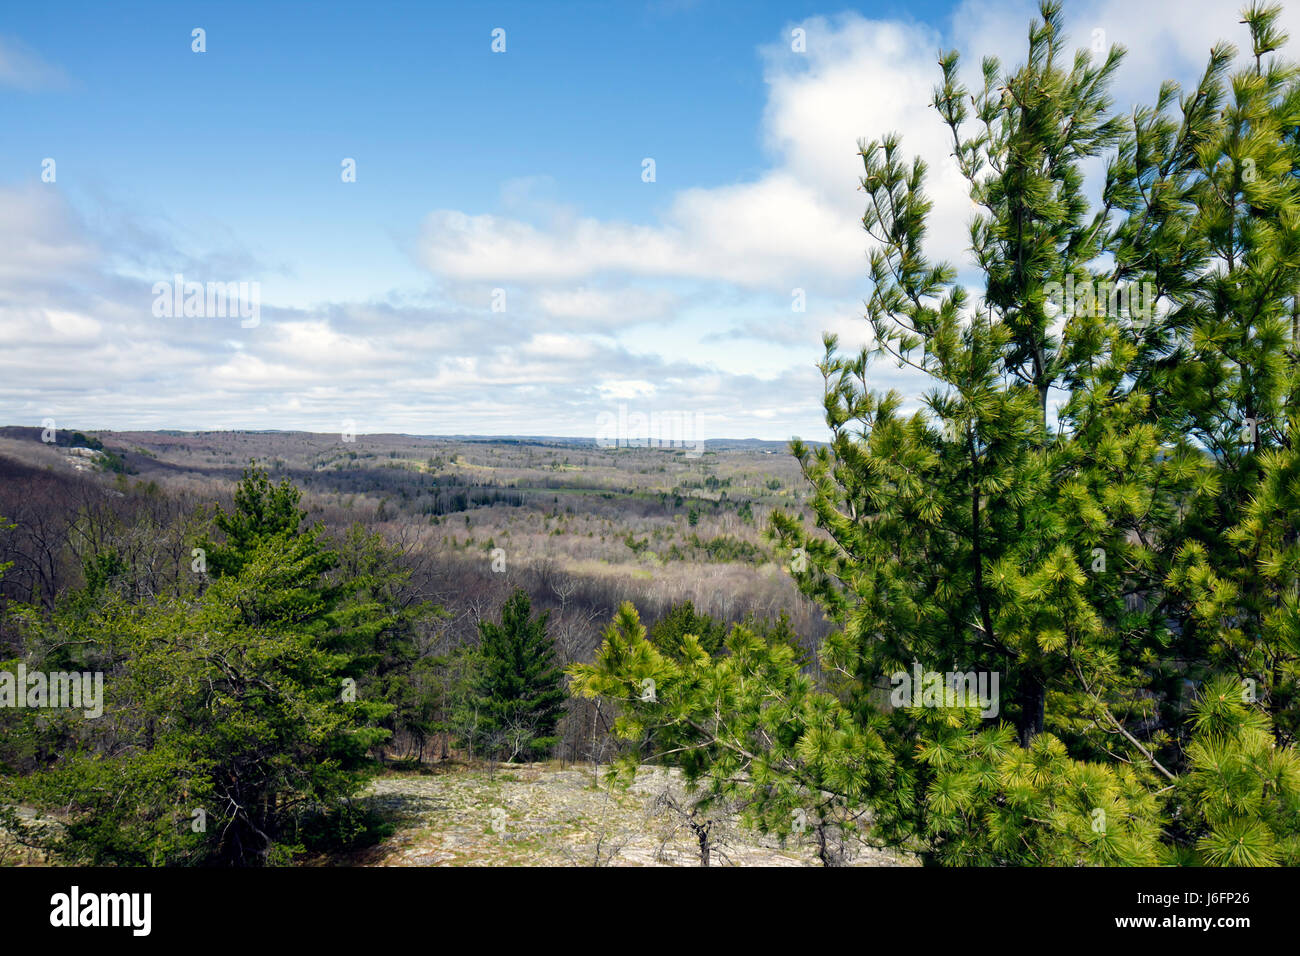 Marquette Michigan Upper Peninsula UP Lake Superior,Mt. Mount Marquette,overlook,early spring,Great Lakes,pine tree,landscape,MI090514035 Stock Photo